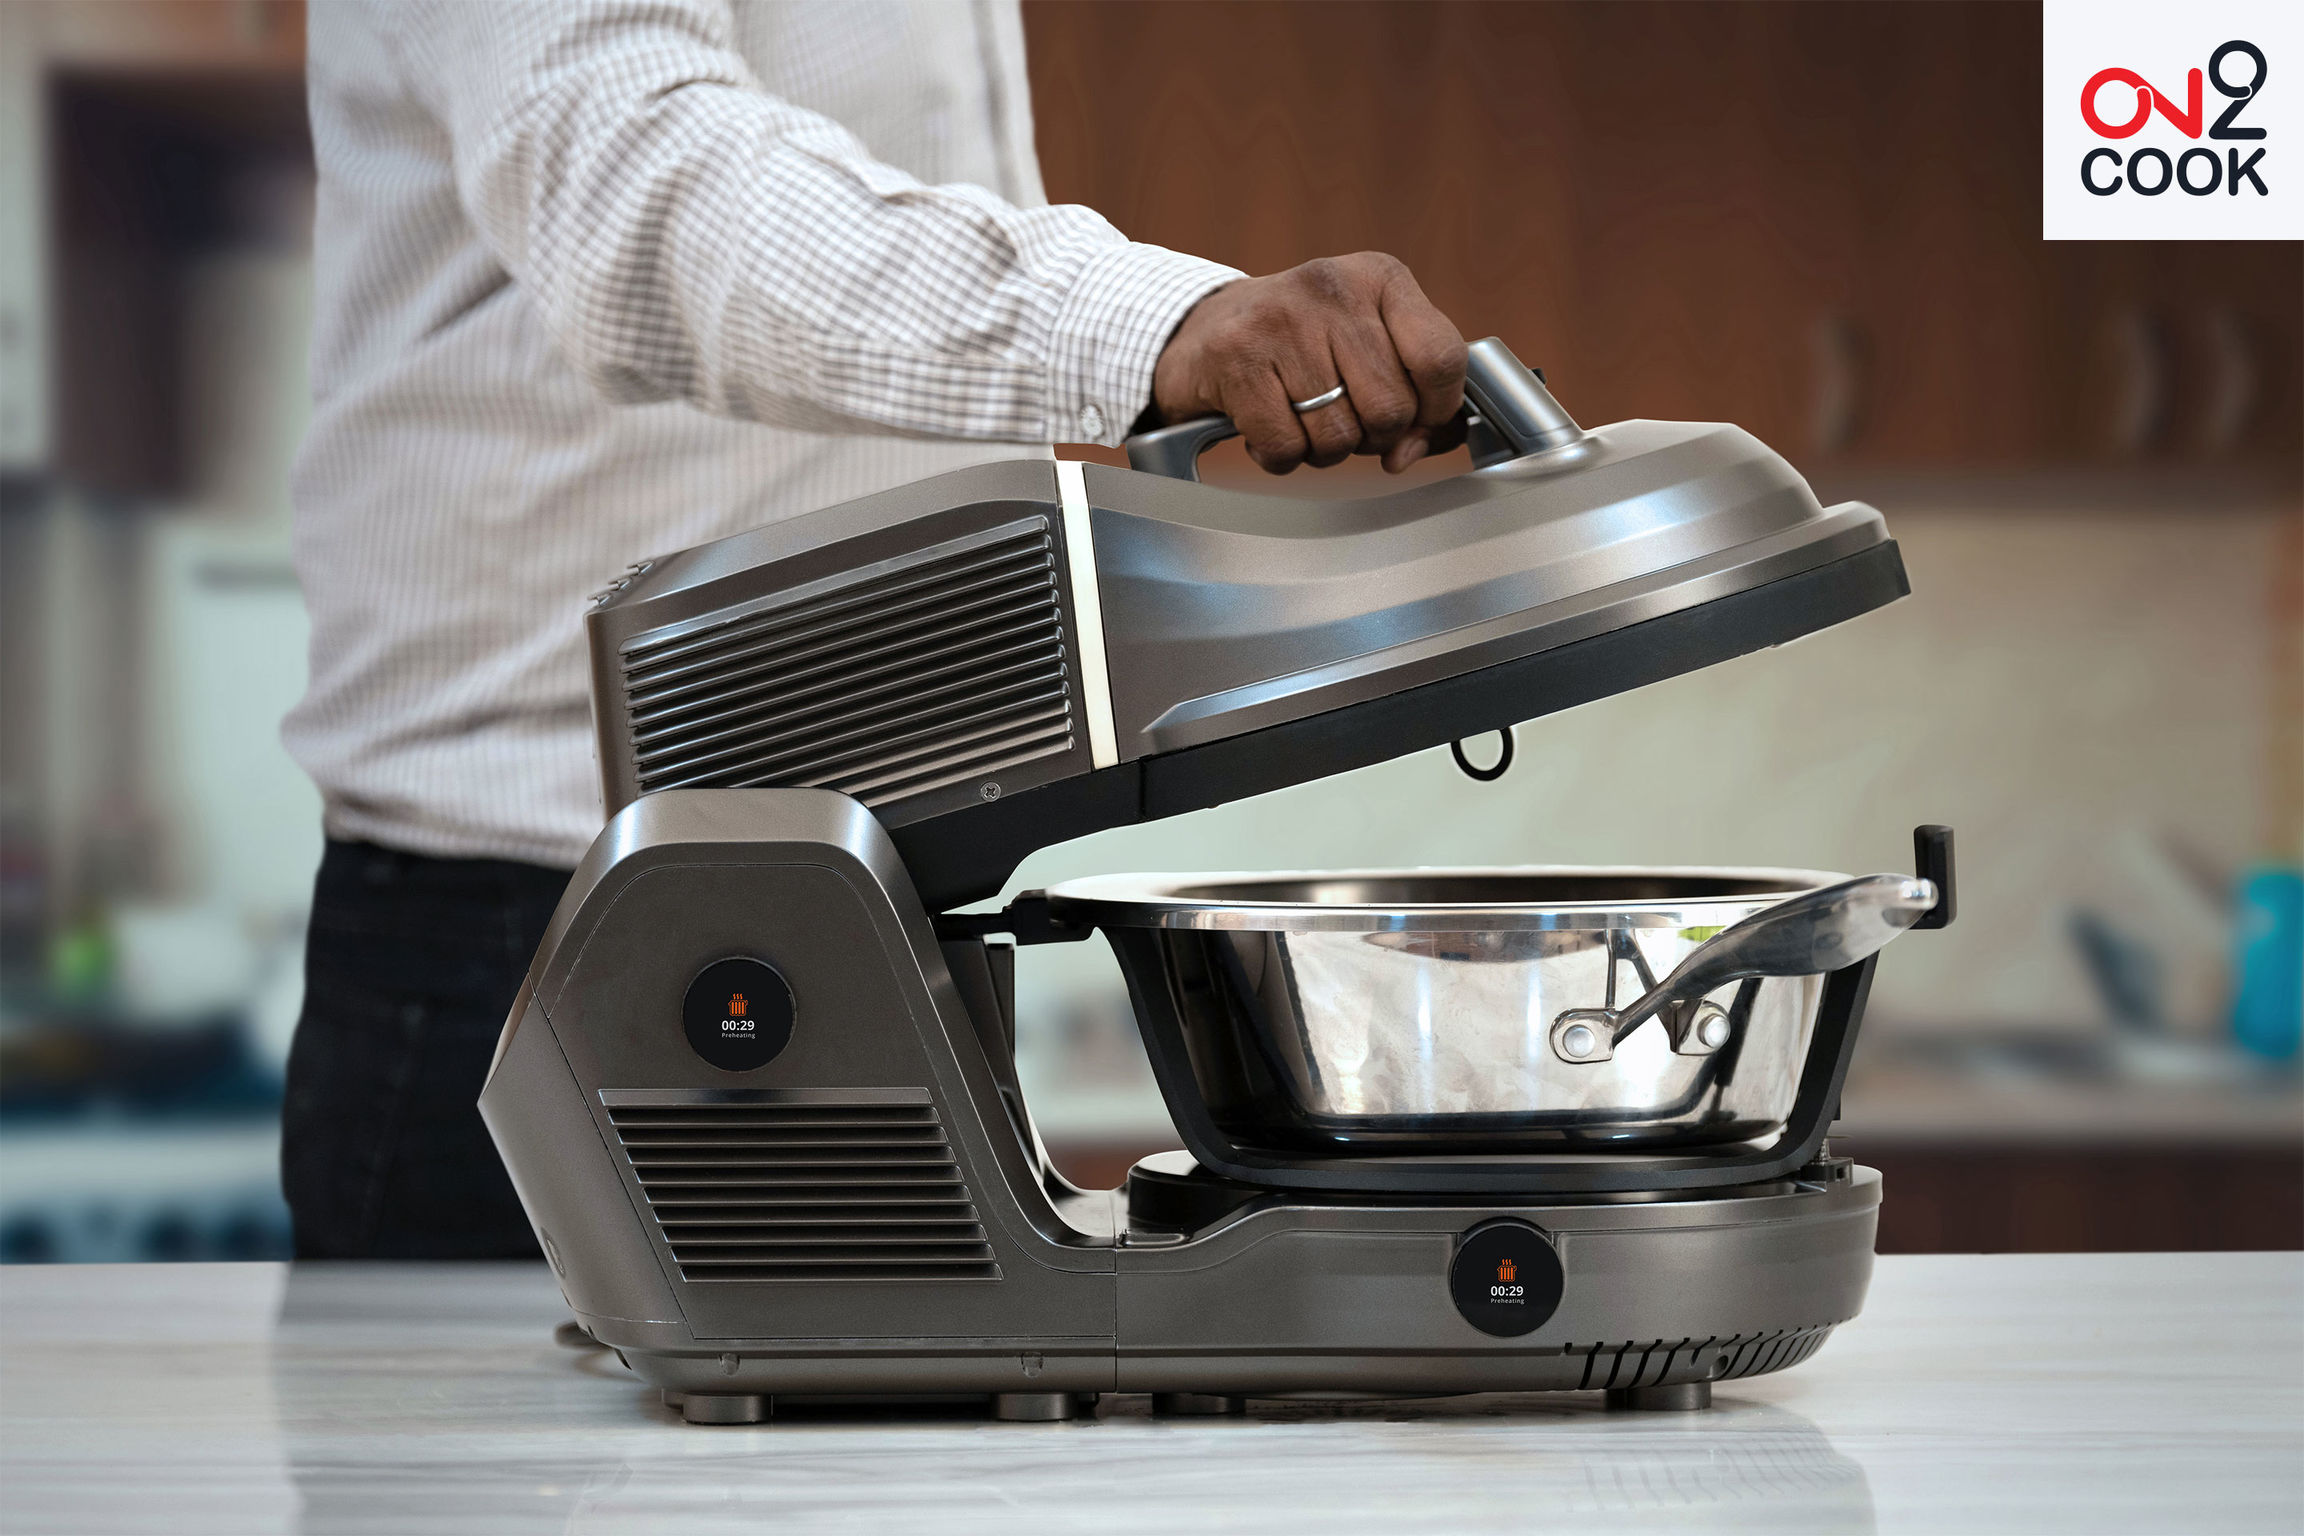 On2Cook: World’s Fastest Cooking Device